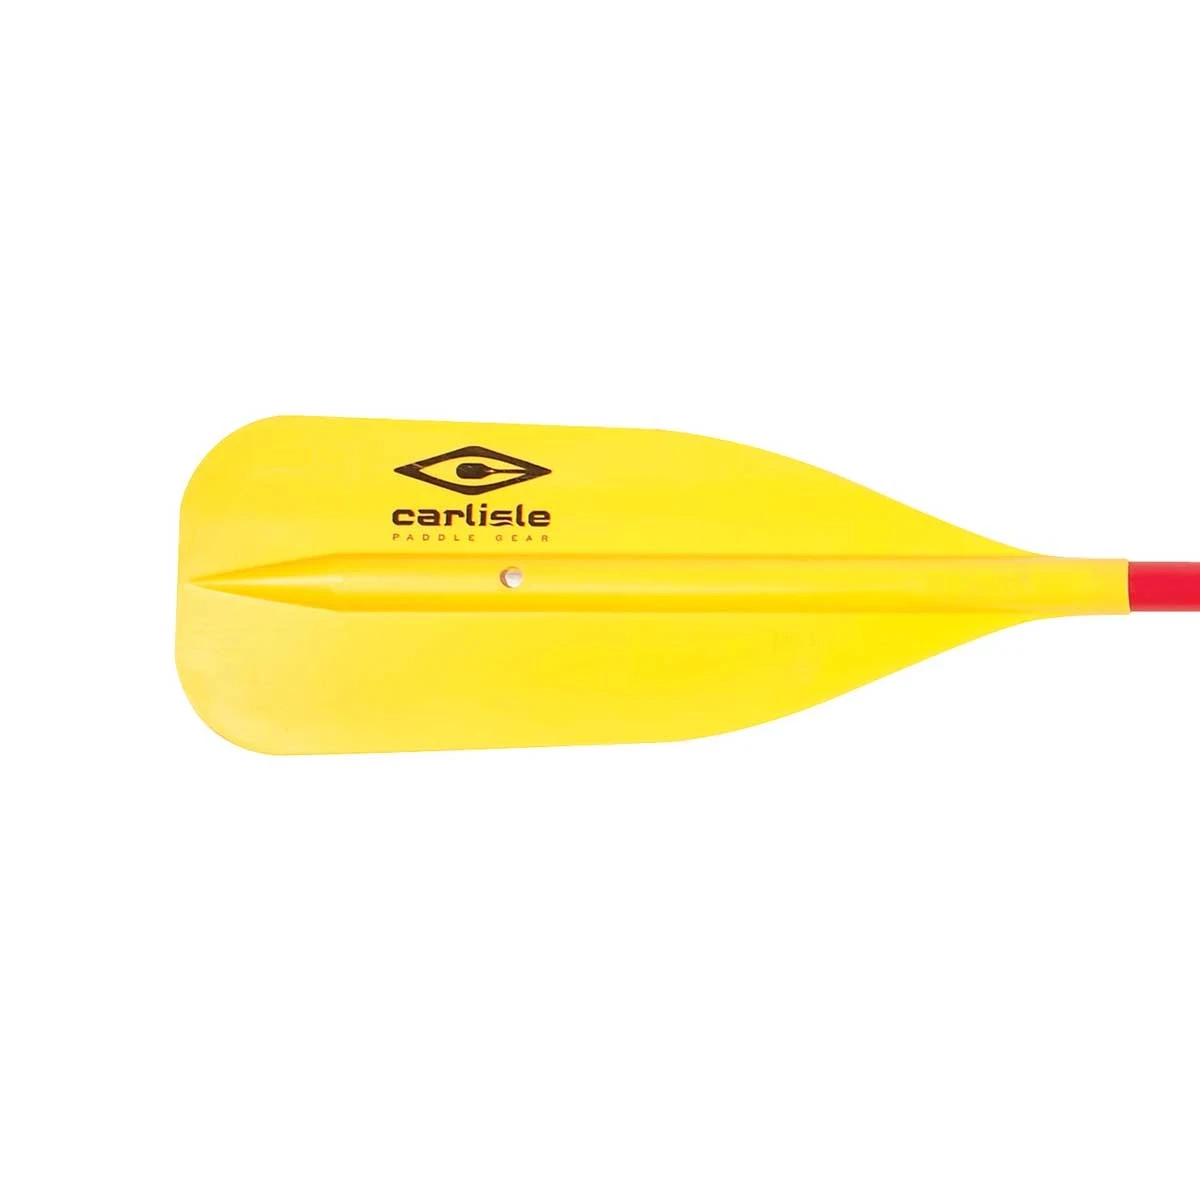 Standard T-Grip Canoe Paddle - Yellow/Red